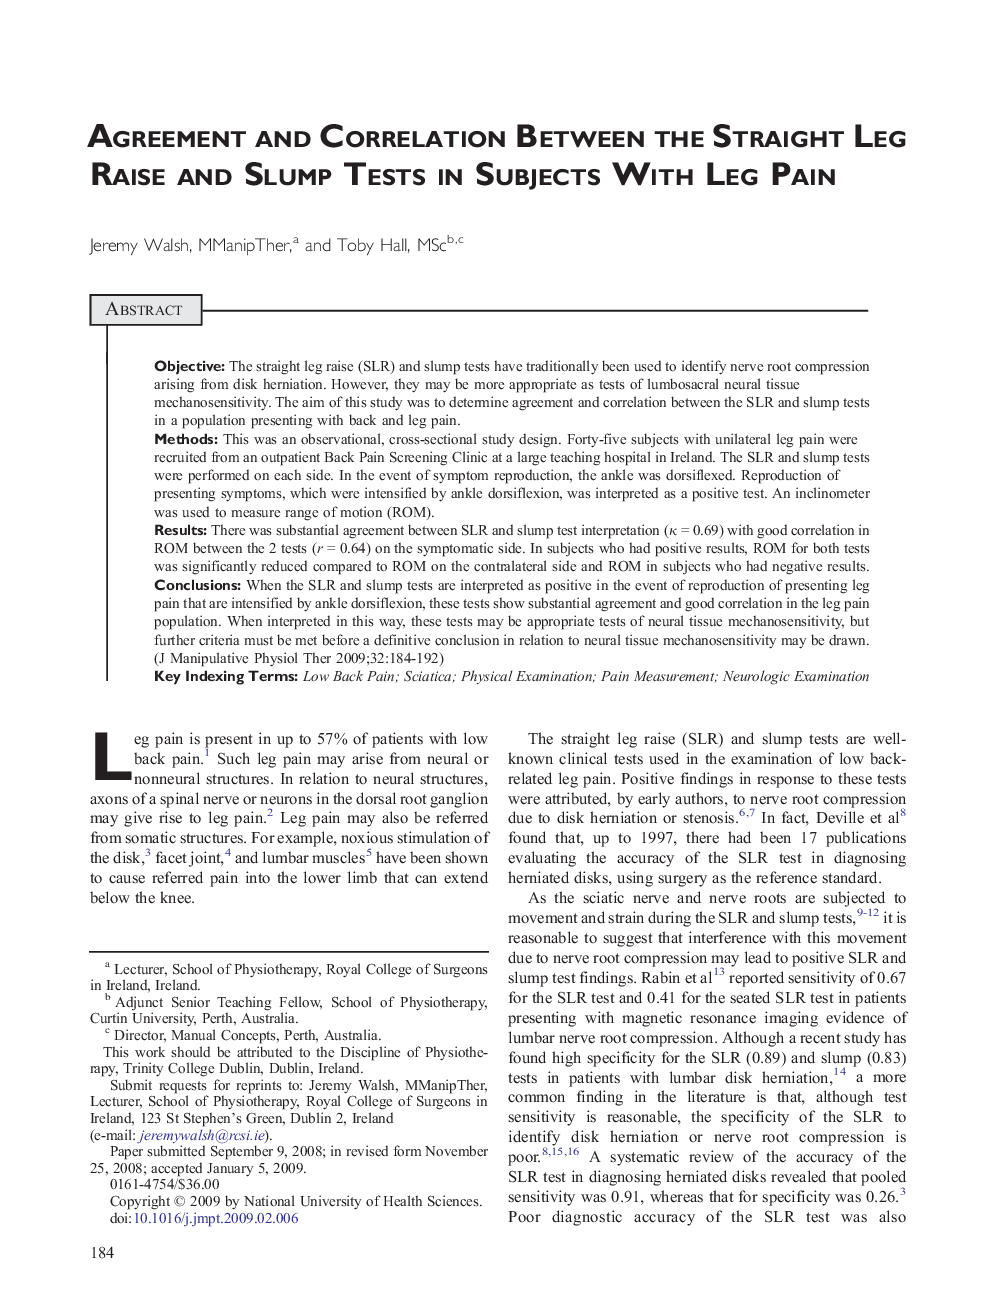 Agreement and Correlation Between the Straight Leg Raise and Slump Tests in Subjects With Leg Pain 